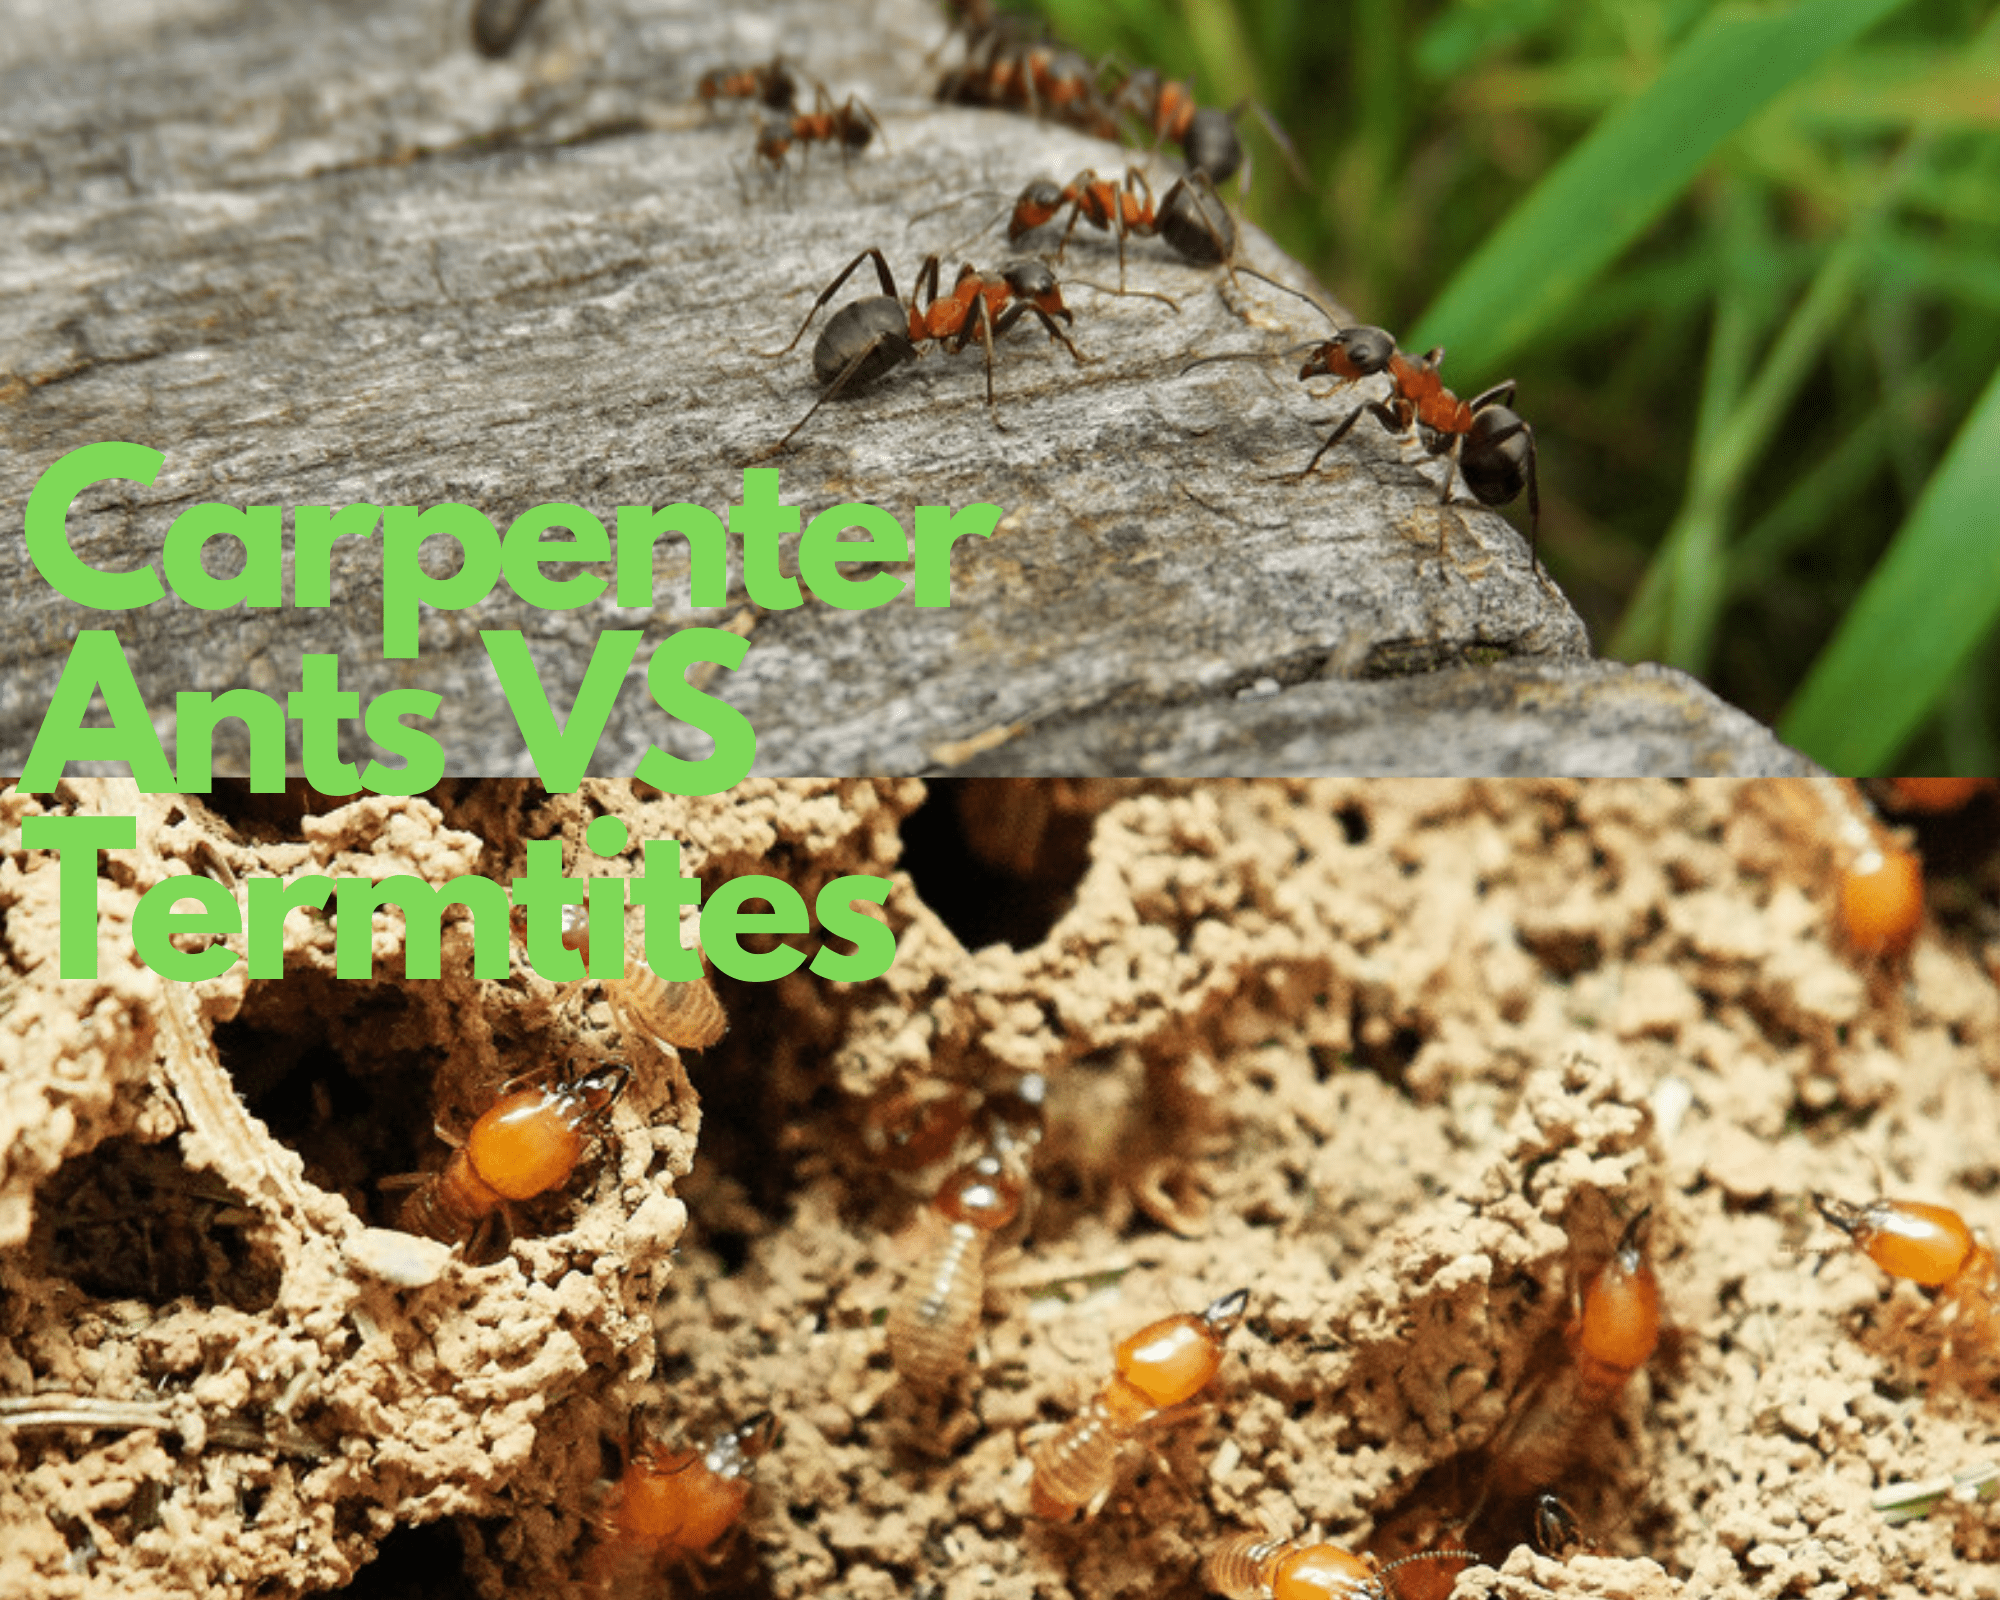 How to Get Rid of Carpenter Ants — Best Ways to Kill Carpenter Ants